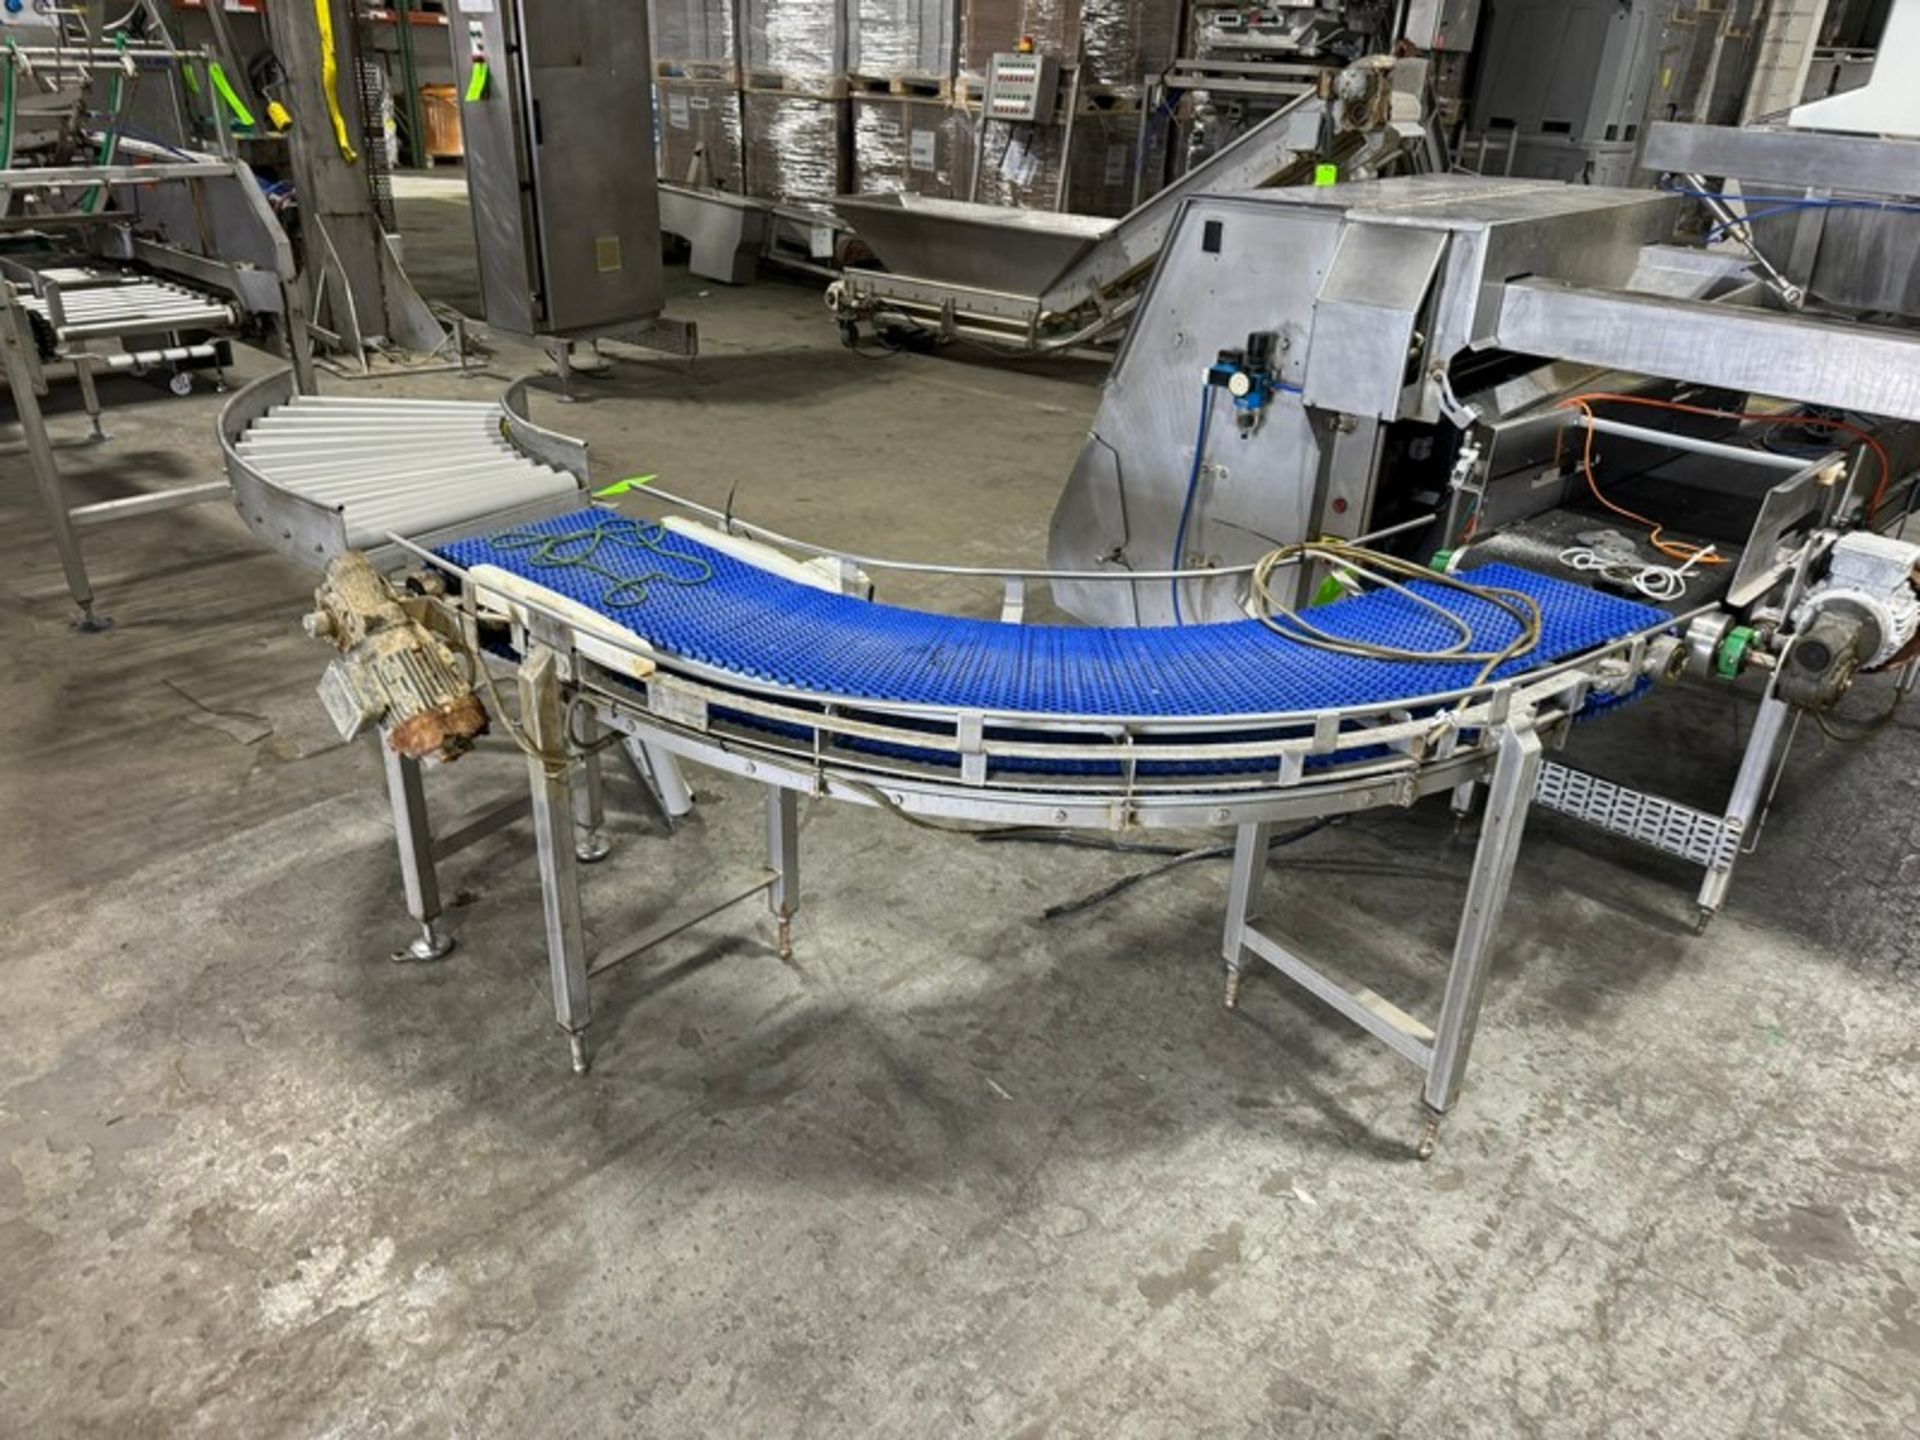 90 Degree Turn Conveyor, with Aprox. 12" W Belt with Drive, with Small Section of Roller Conveyor ( - Image 3 of 4